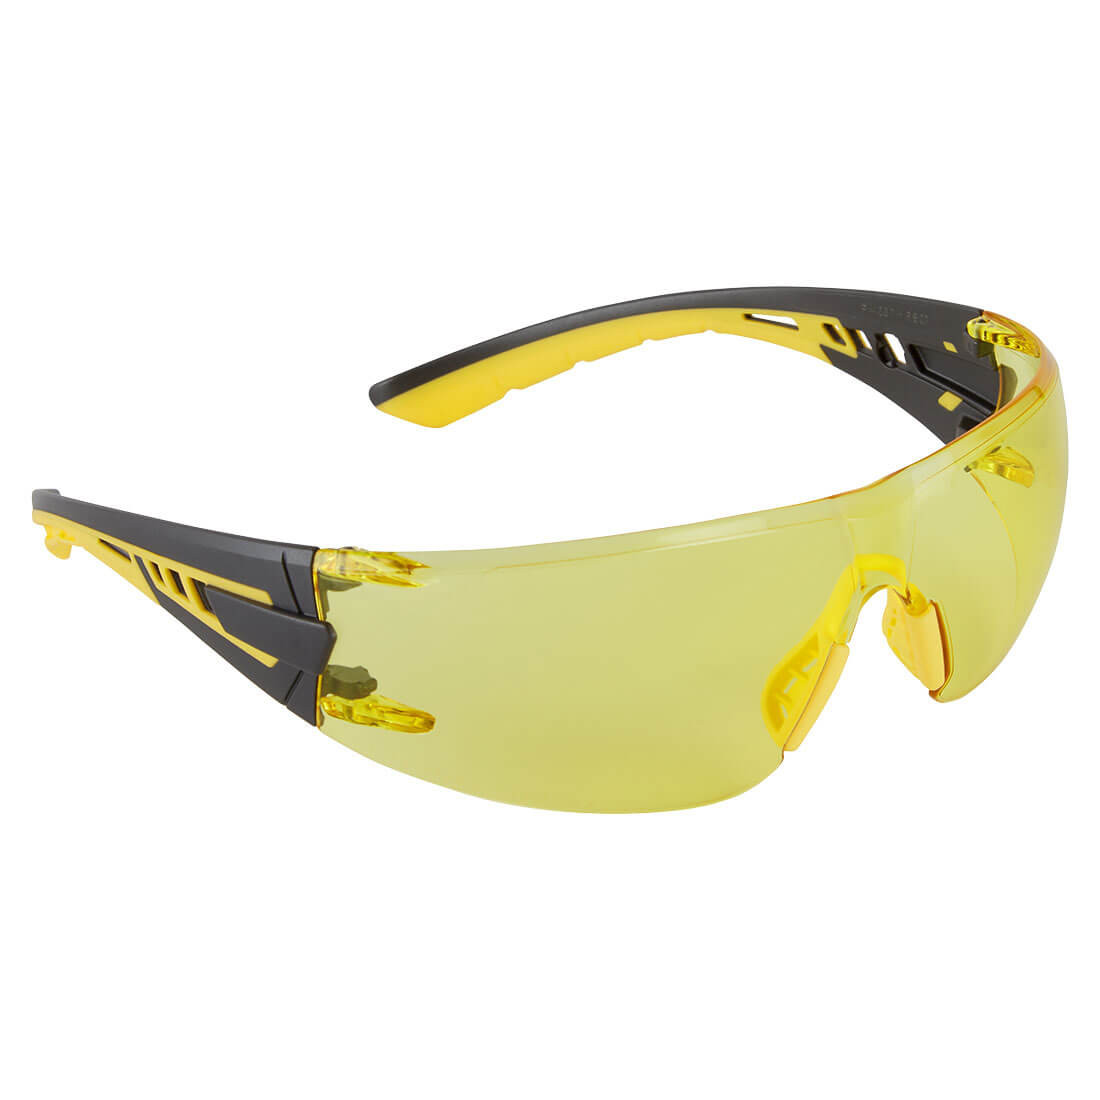 Tech Look Lite KN Safety Glasses - Personal protection